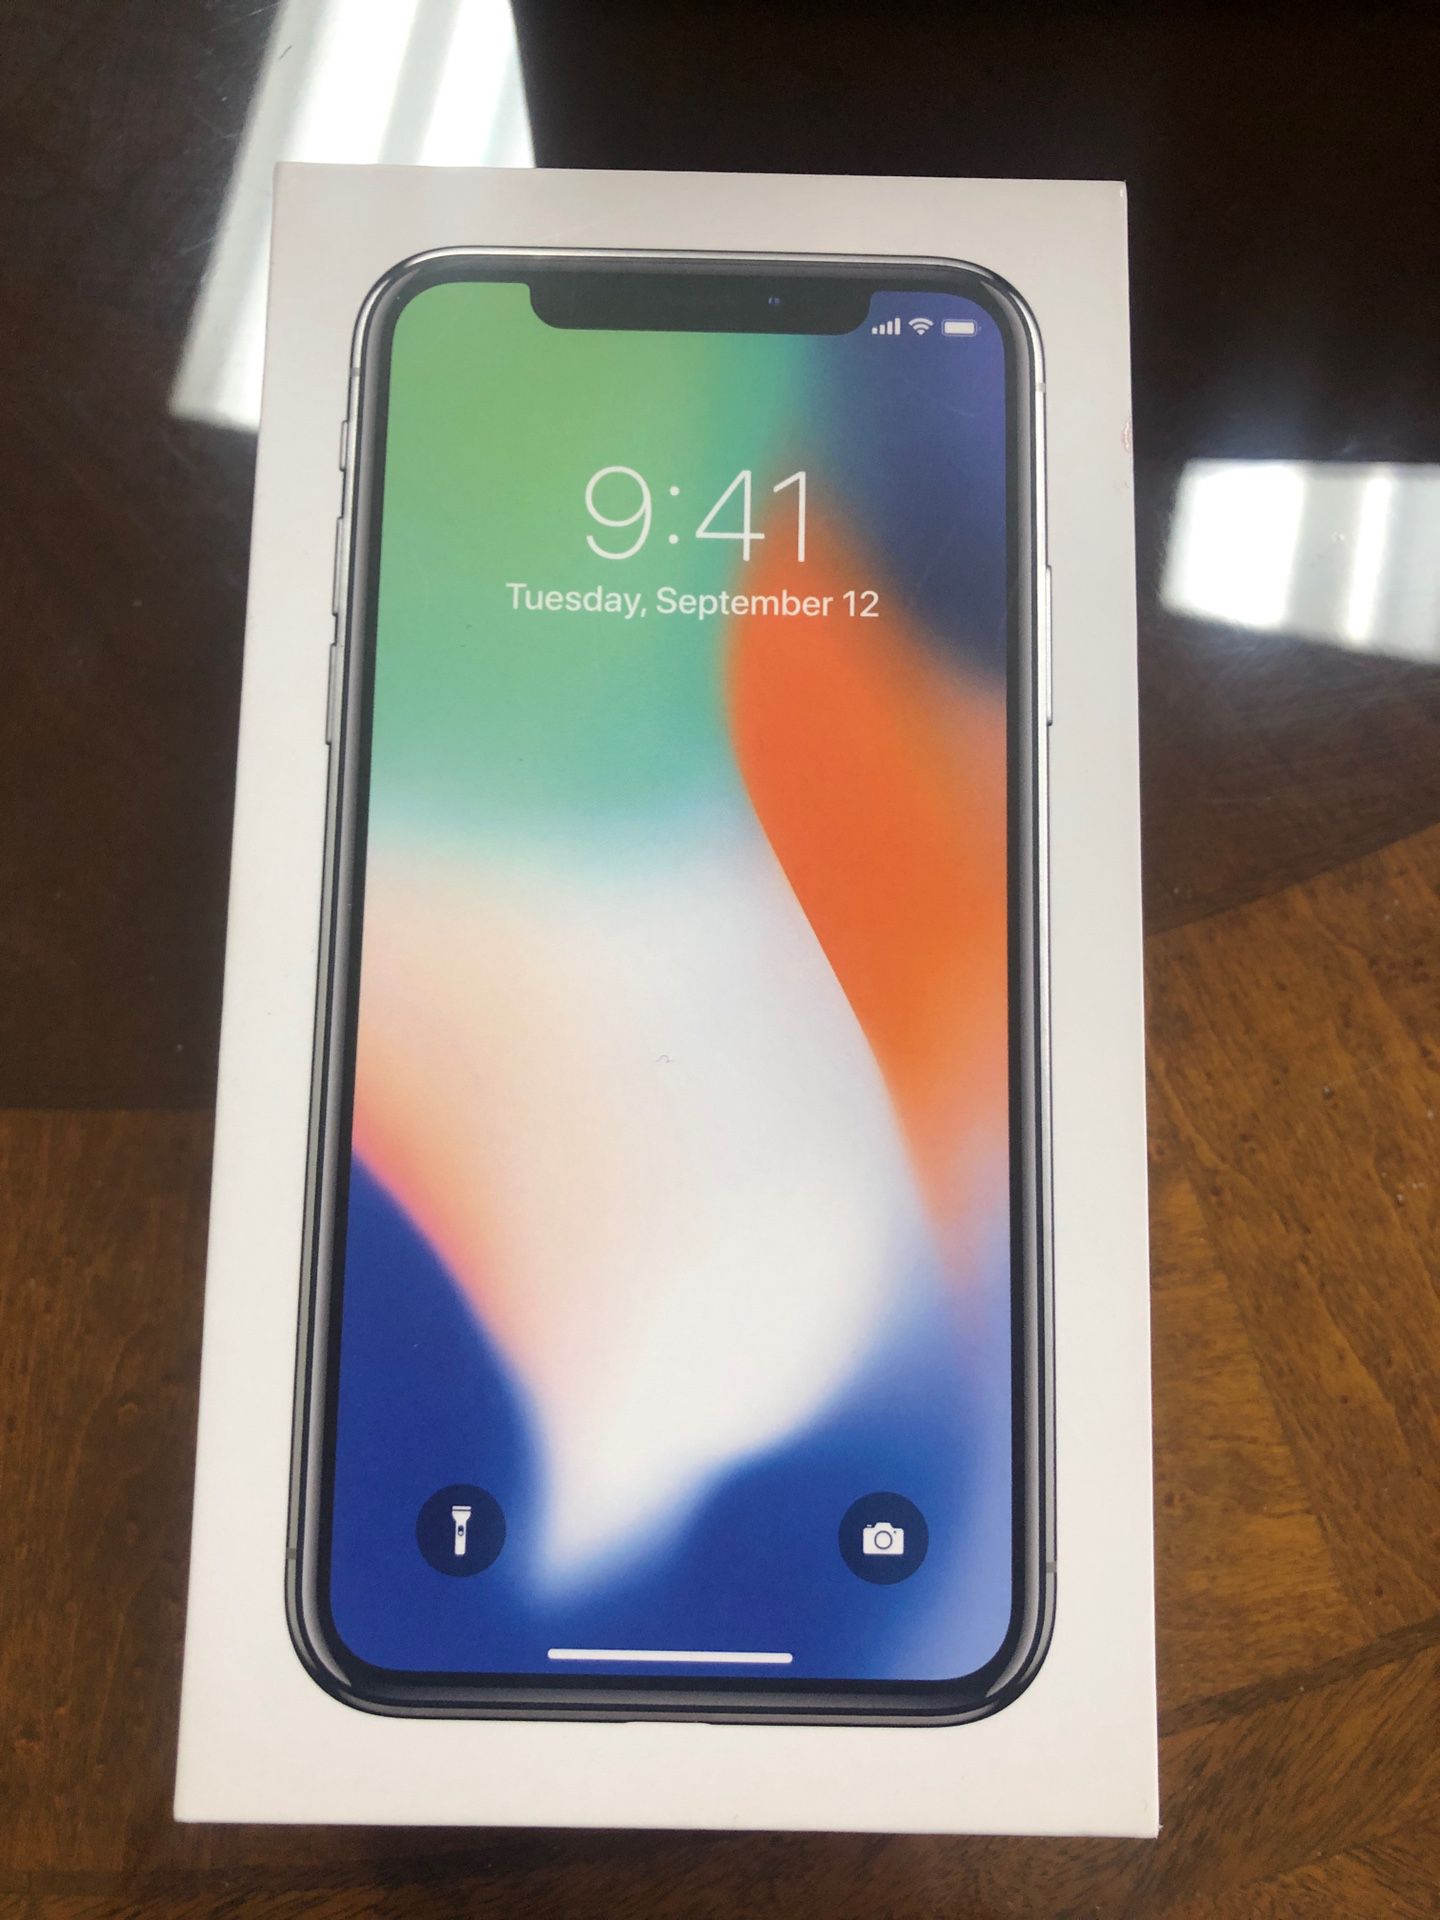 iPhone X 64gb unlocked for any carrier